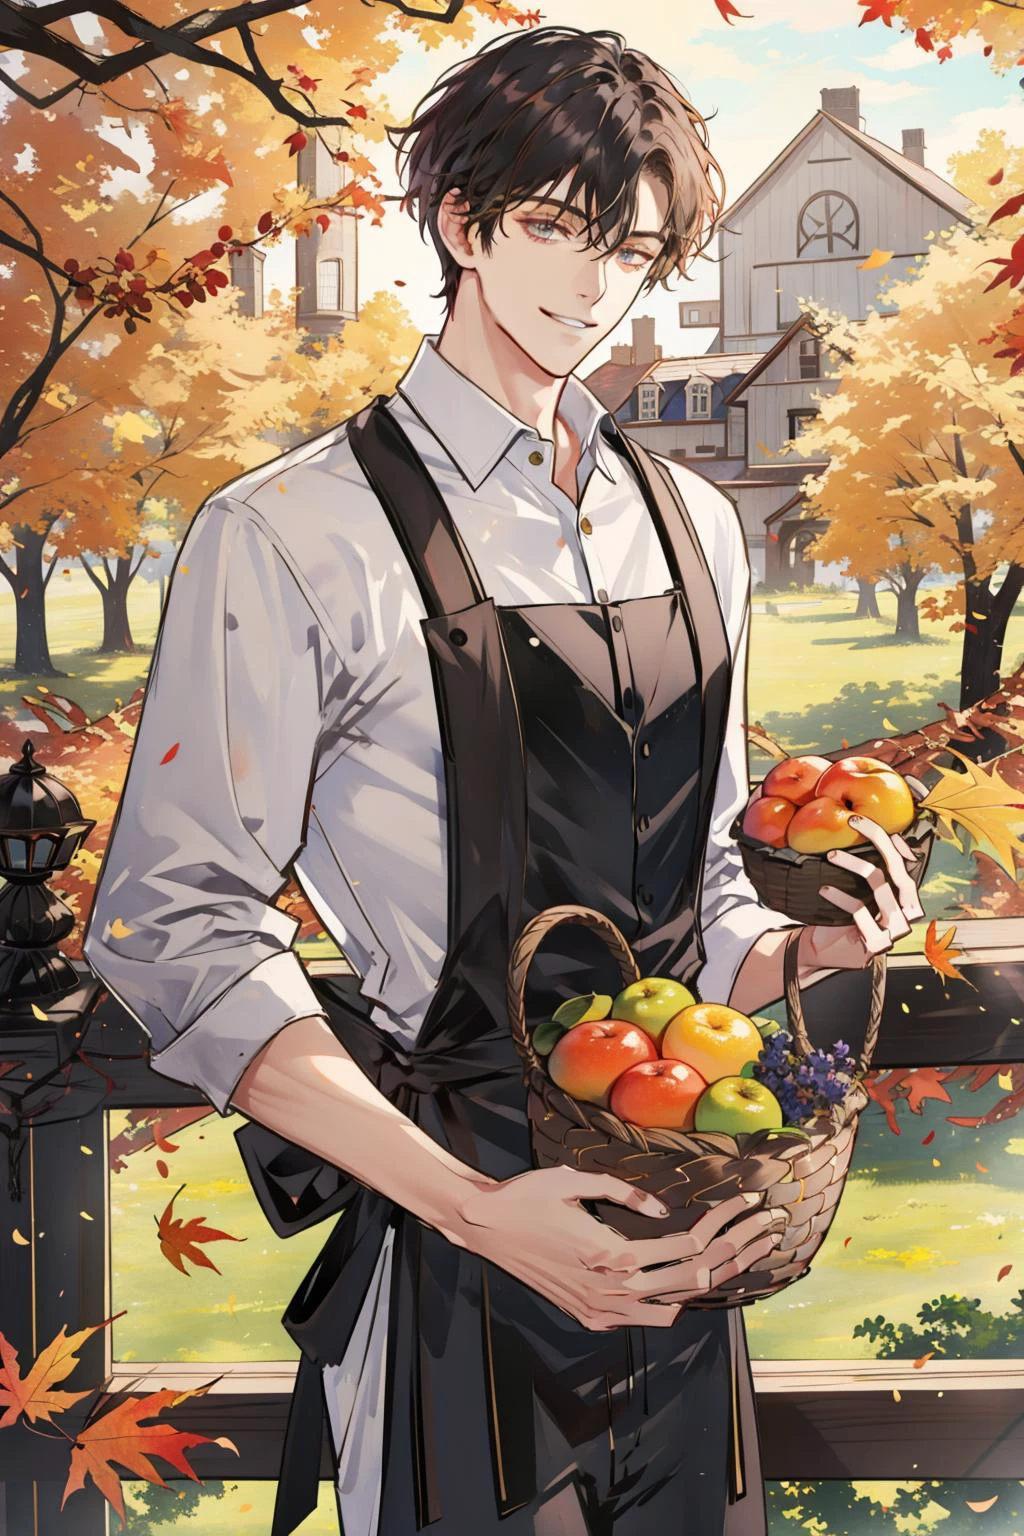 masterpiece, best quality, 1 male, adult, handsome, tall muscular guy, broad shoulders, finely detailed eyes and detailed face, extremely detailed CG unity 8k wallpaper, intricate details, autumn, farm, orchard, fruit trees, sunlight, warm scene, unformal casual clothes, old apron, leather jumpsuit, The man is smiling with a basket full of fruit, depth of field